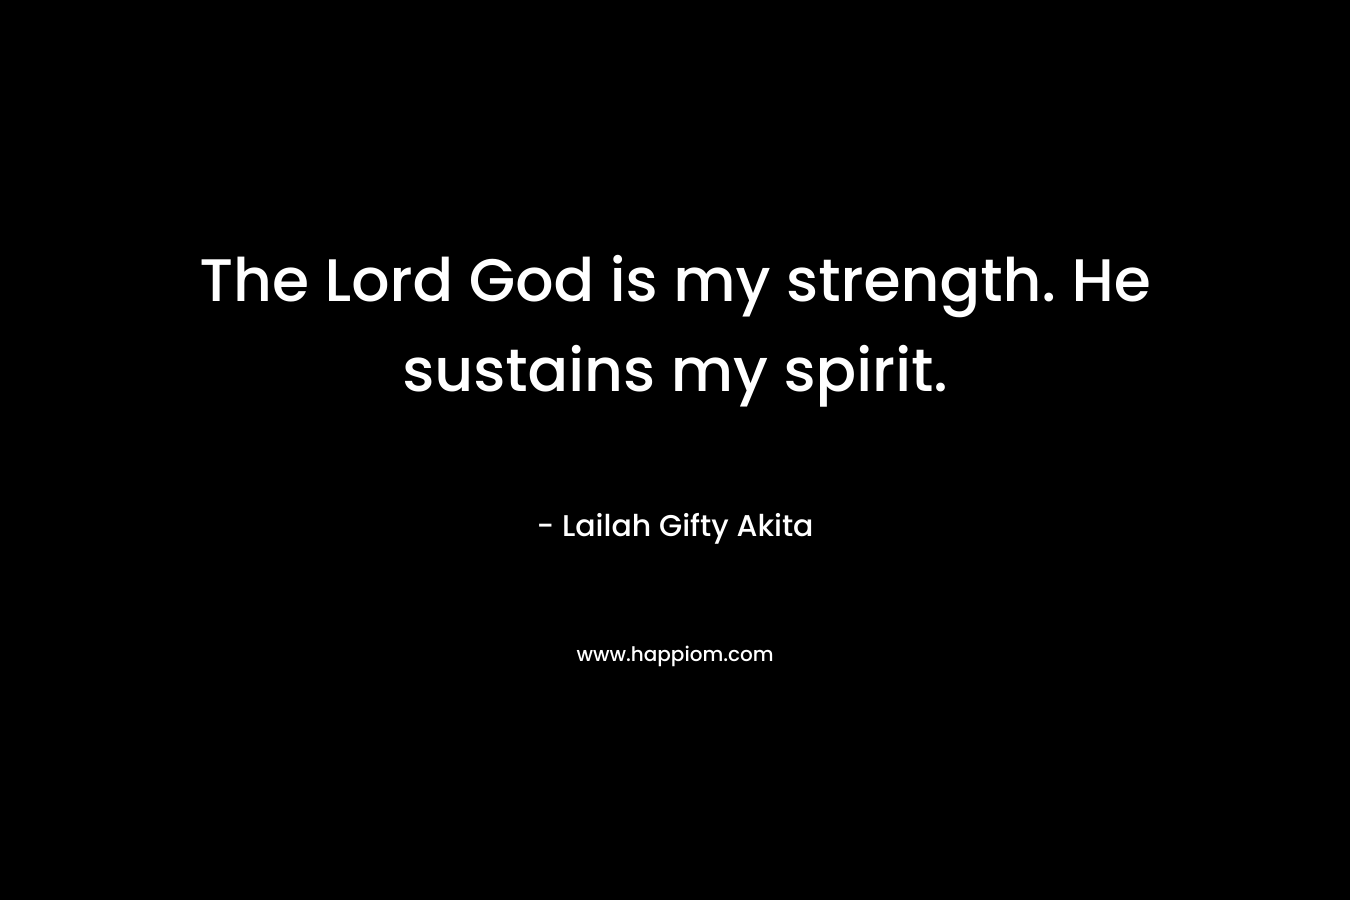 The Lord God is my strength. He sustains my spirit.